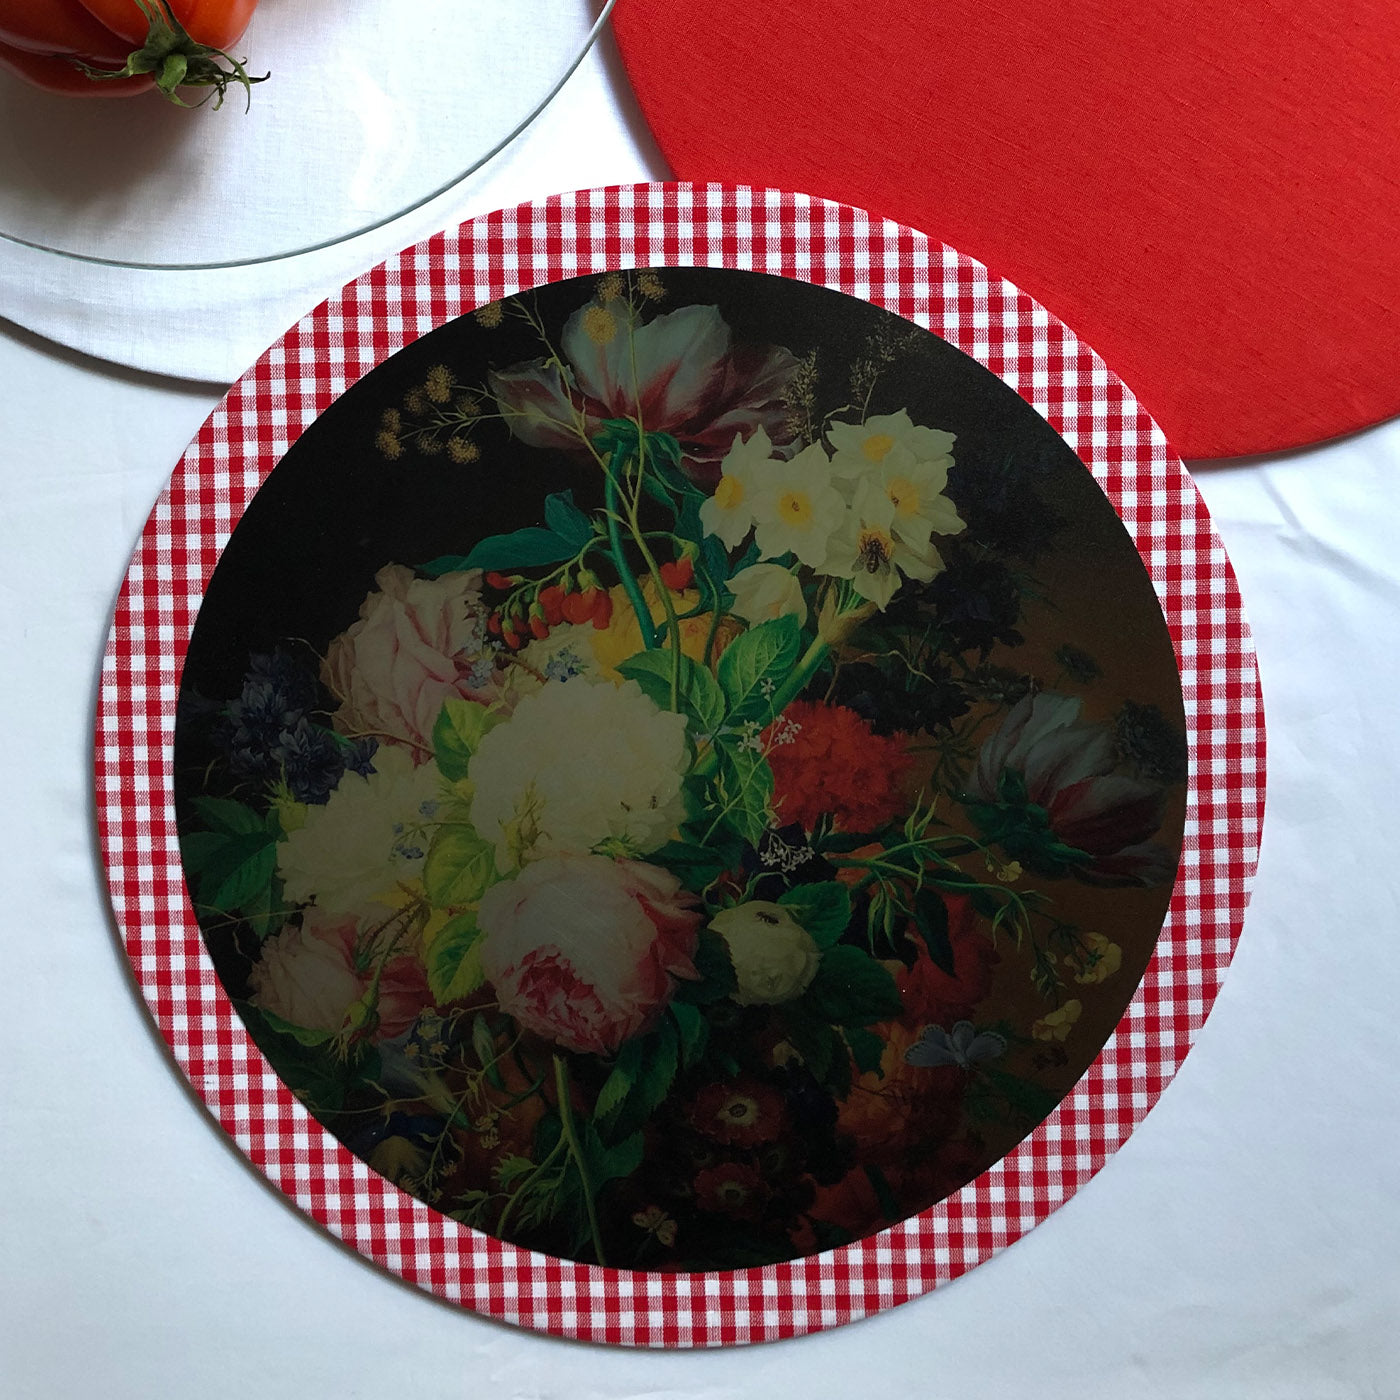 Cuffiette Check Round Red & White Placemat #2 - Alternative view 3